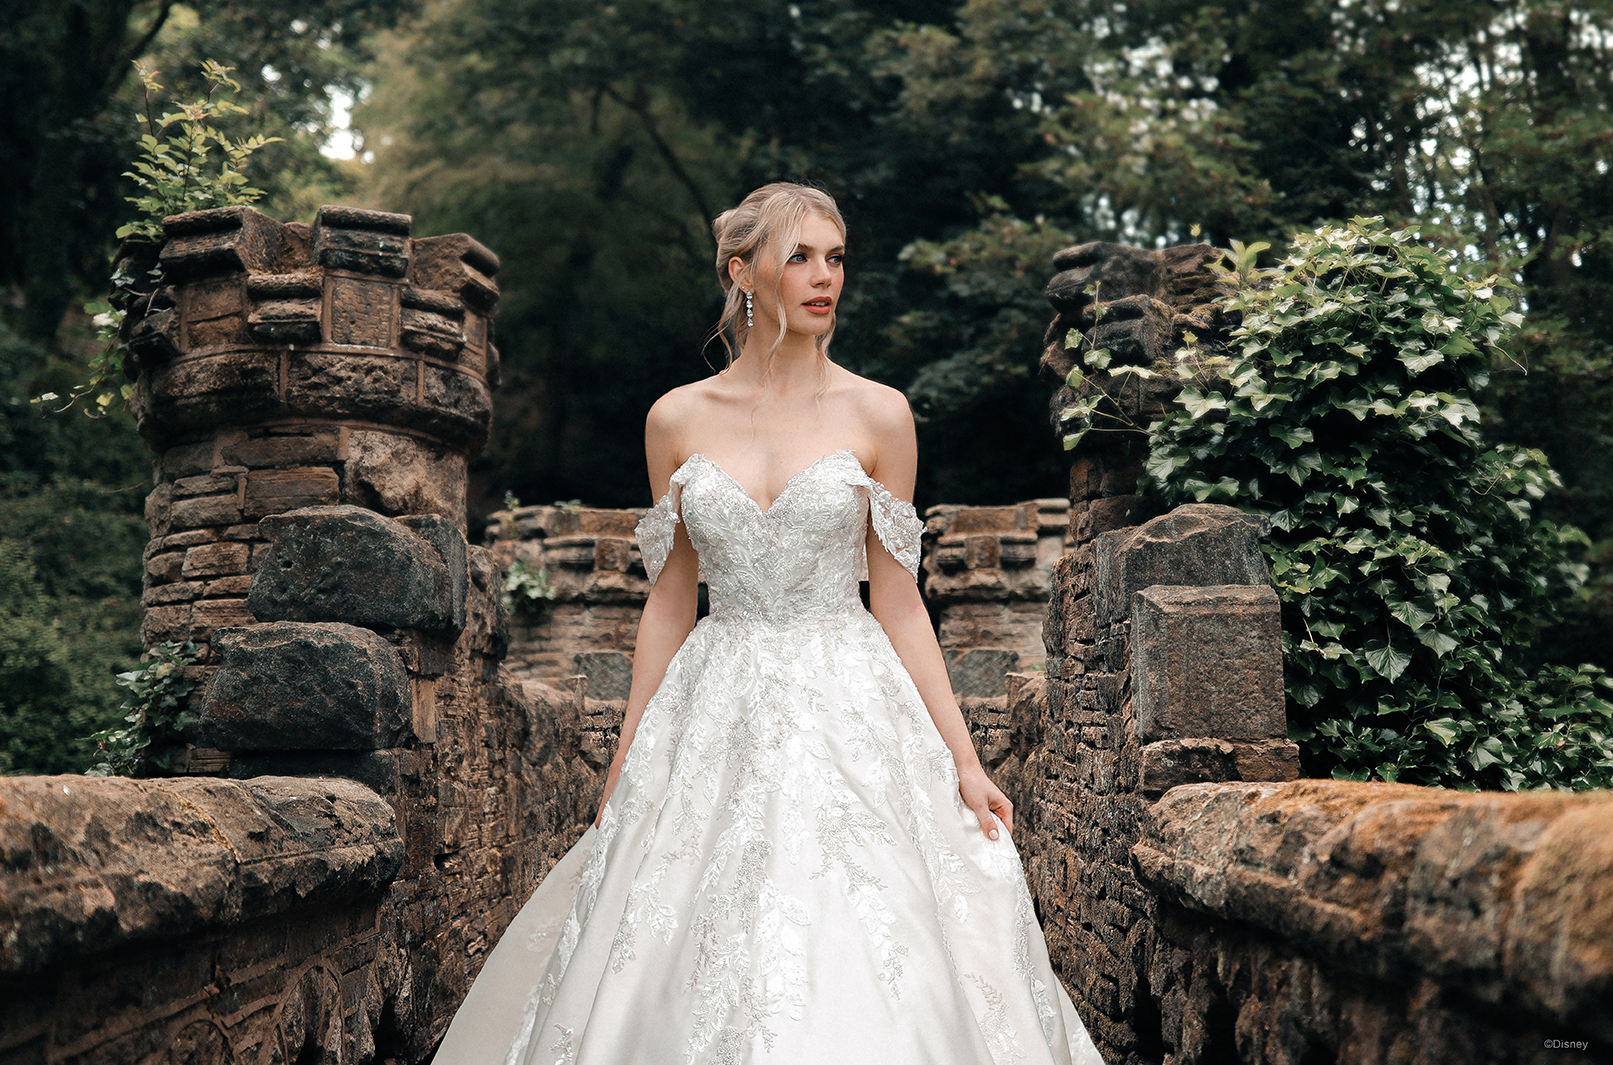 2021 Disney Fairy Tale Wedding Gowns by Allure Bridals